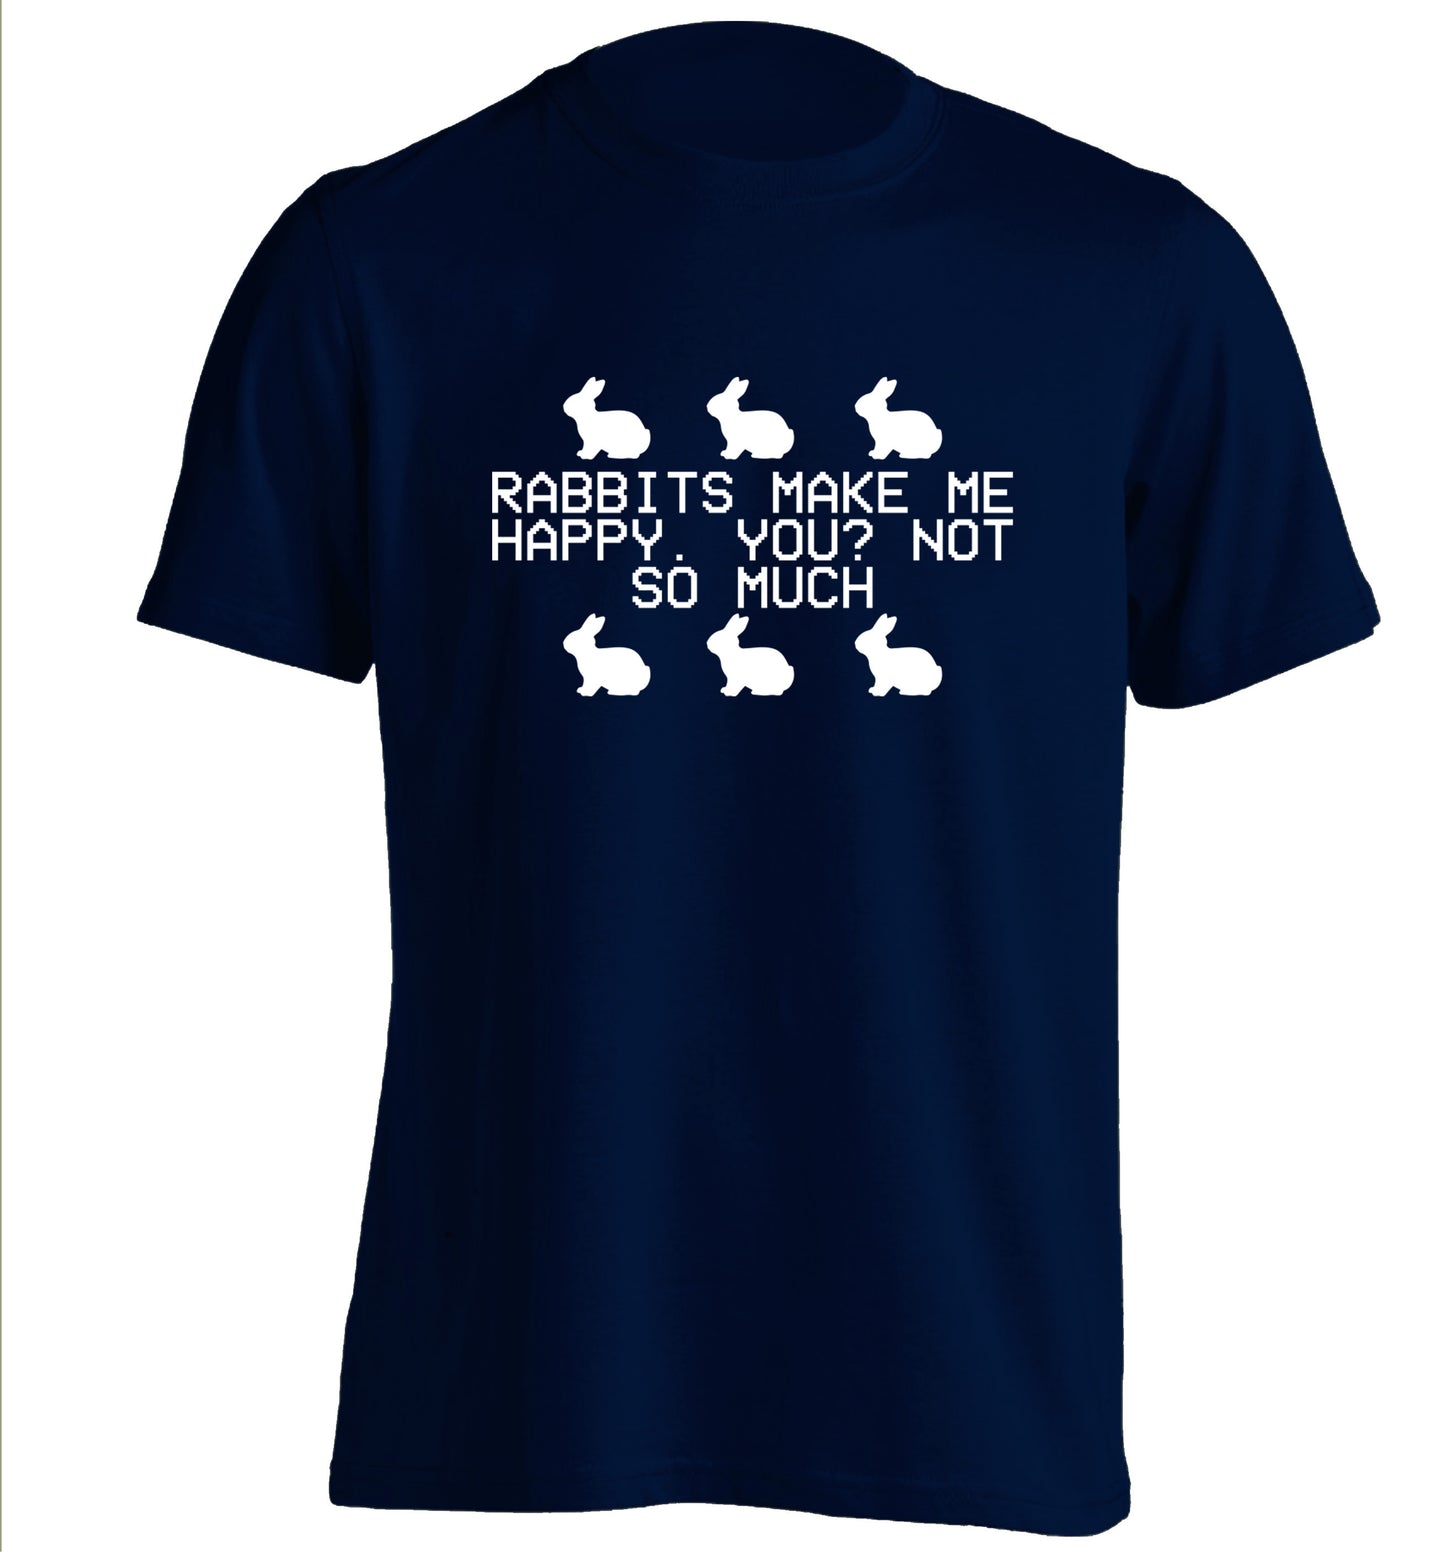 Rabbits make me happy, you not so much adults unisex navy Tshirt 2XL